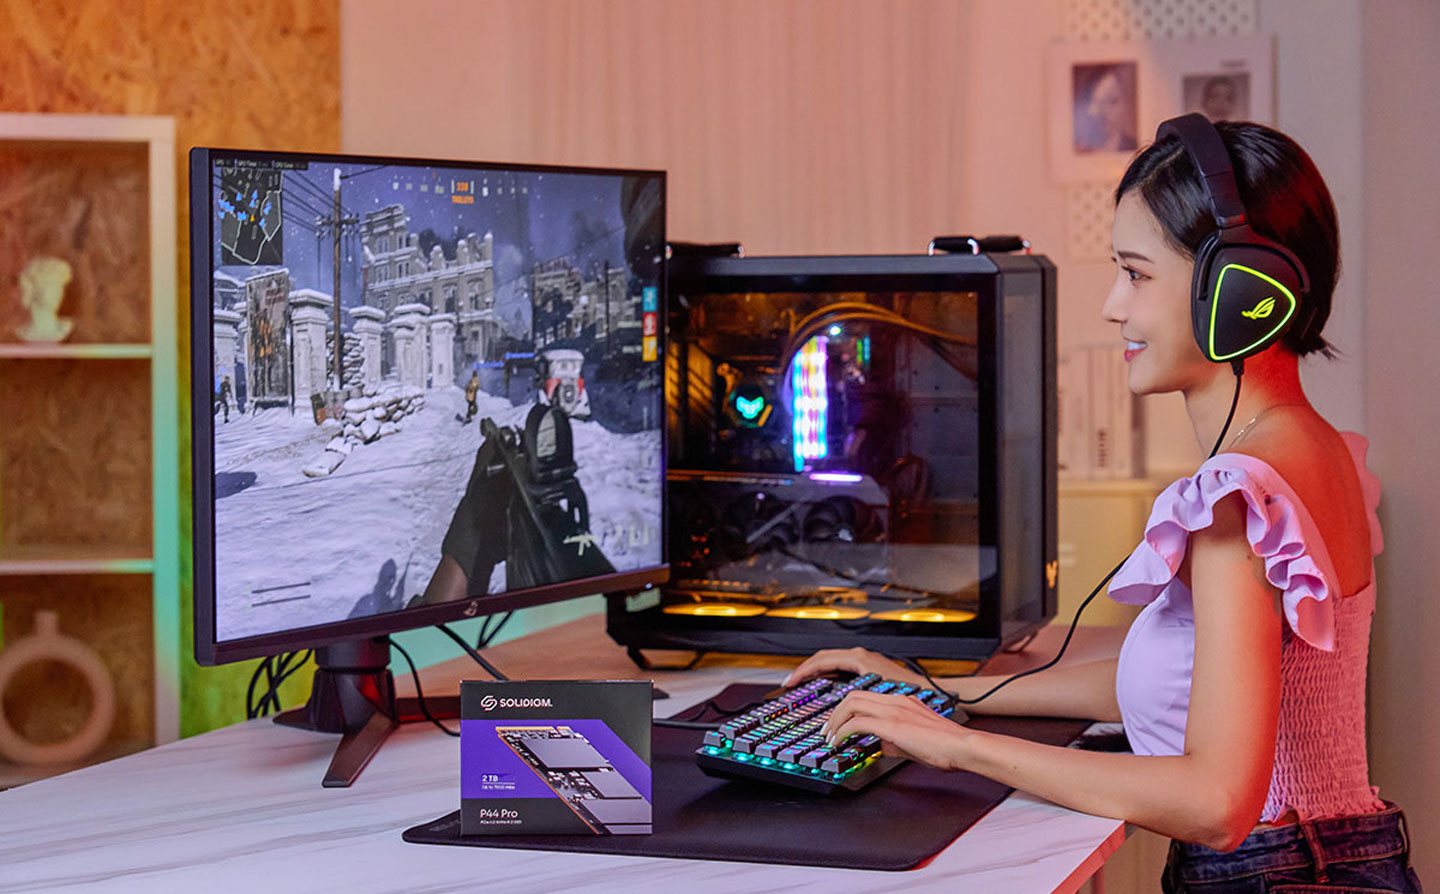 For gamers, SOLIDIGM P44 Pro brings more efficient access speed and also helps the smooth running of games, especially for open world games with large scenes, which will test the performance of storage devices.